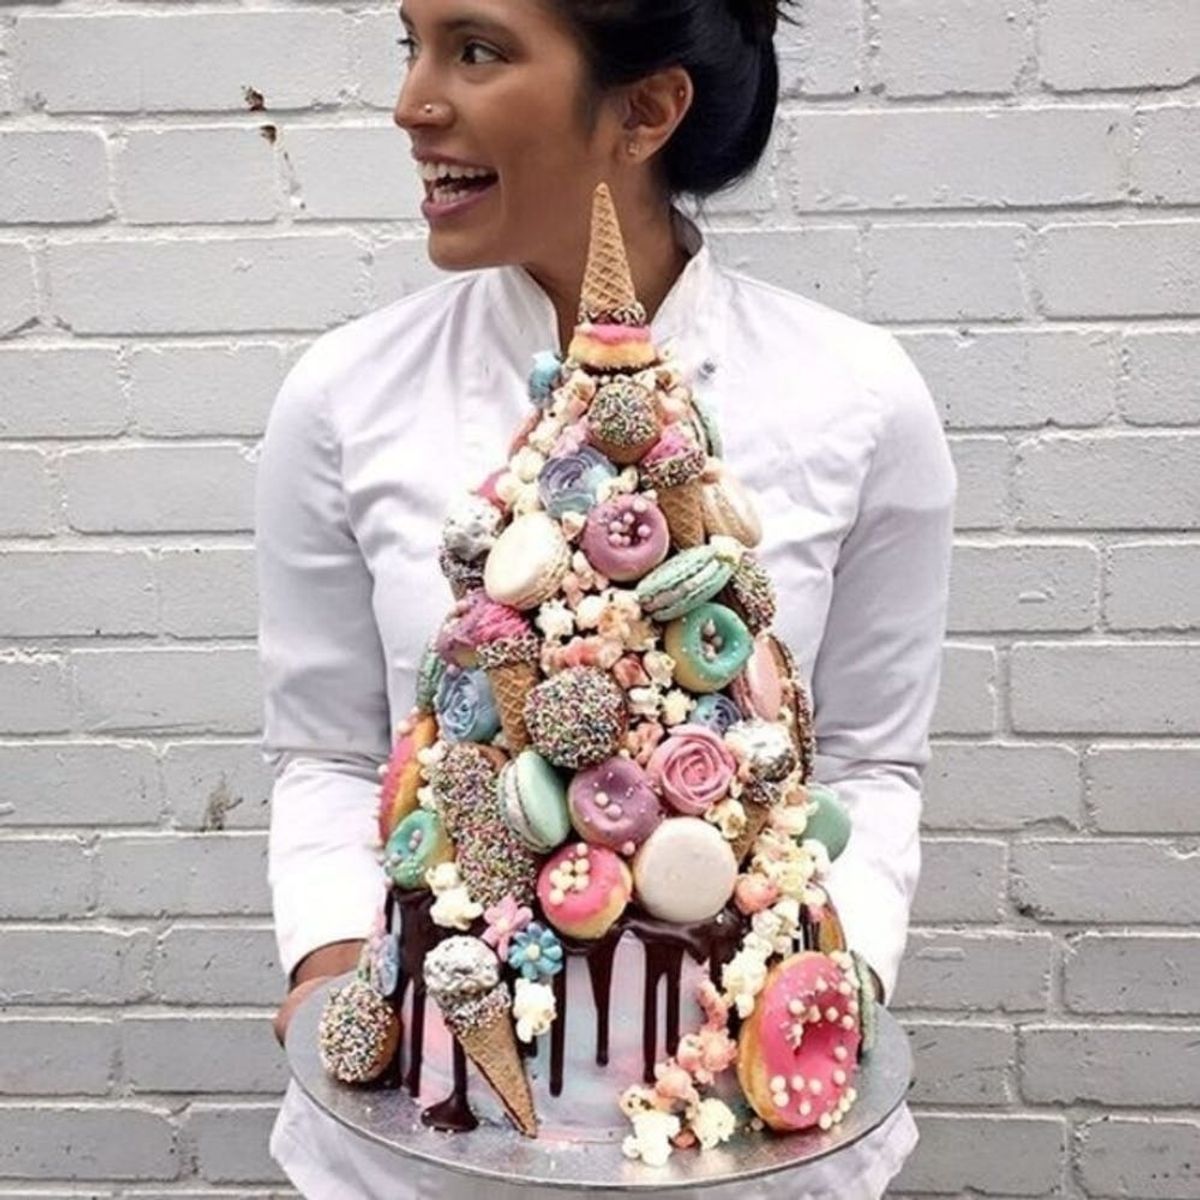 This Unicorn-Inspired Wedding Cake Is Embracing *All* the Trends